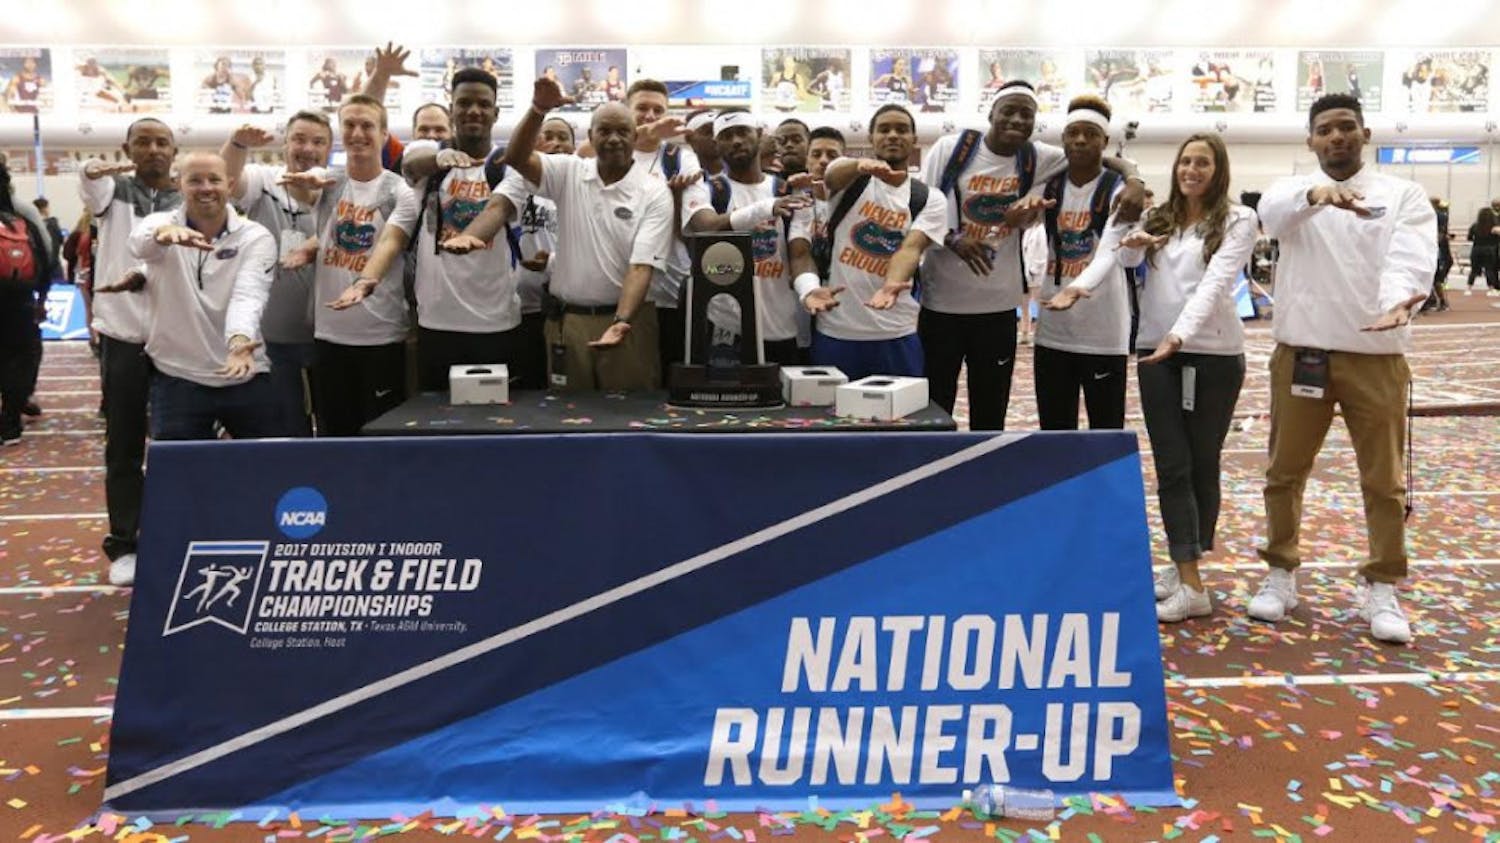 The UF men's track team poses for a photo after finishing in second place in the NCAA Indoor Championships Saturday at Gilliam Indoor Stadium in College Station, Texas.